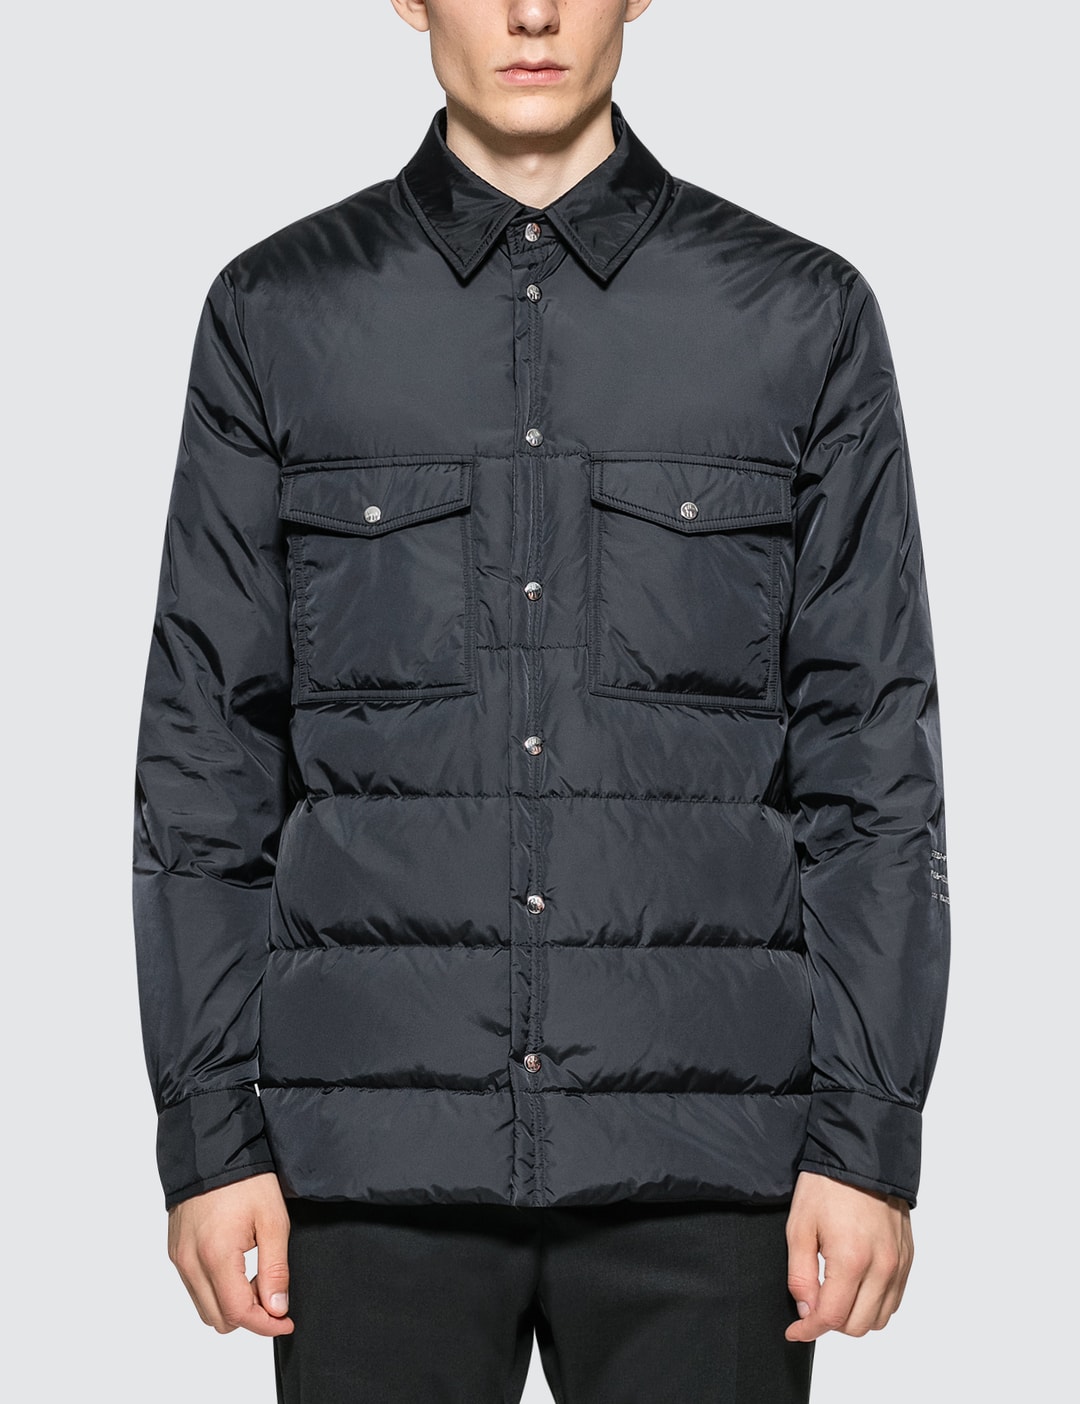 Moncler Genius - HBX and by Fashion - x Hypebeast Curated Fragment Maze | Moncler Globally Design Lifestyle Jacket